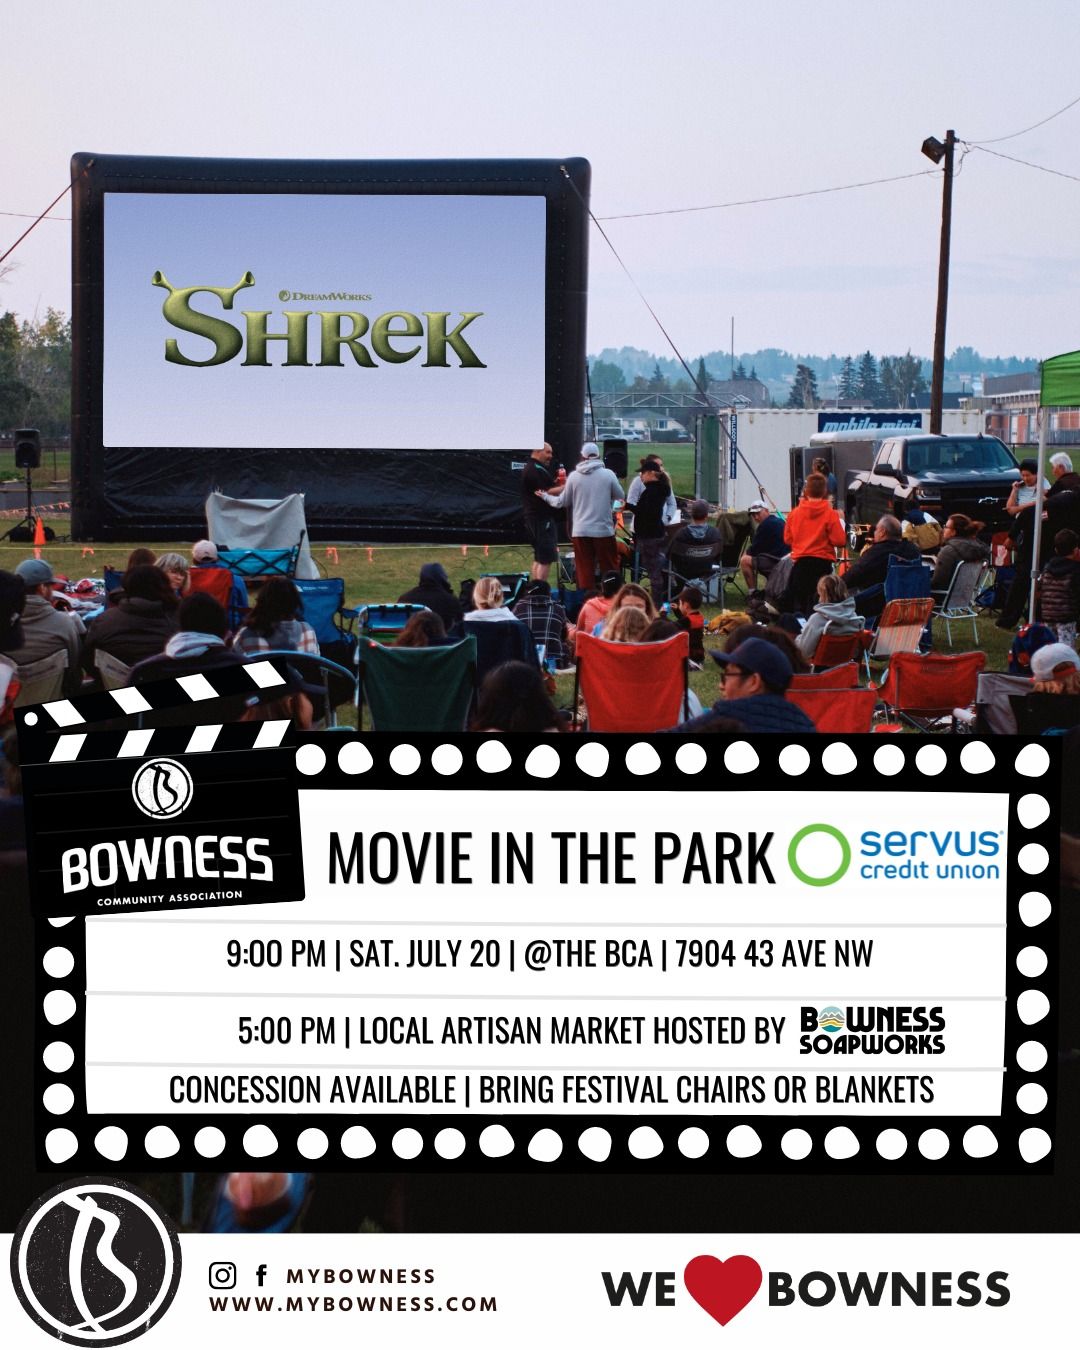 Bowness Movie in the Park